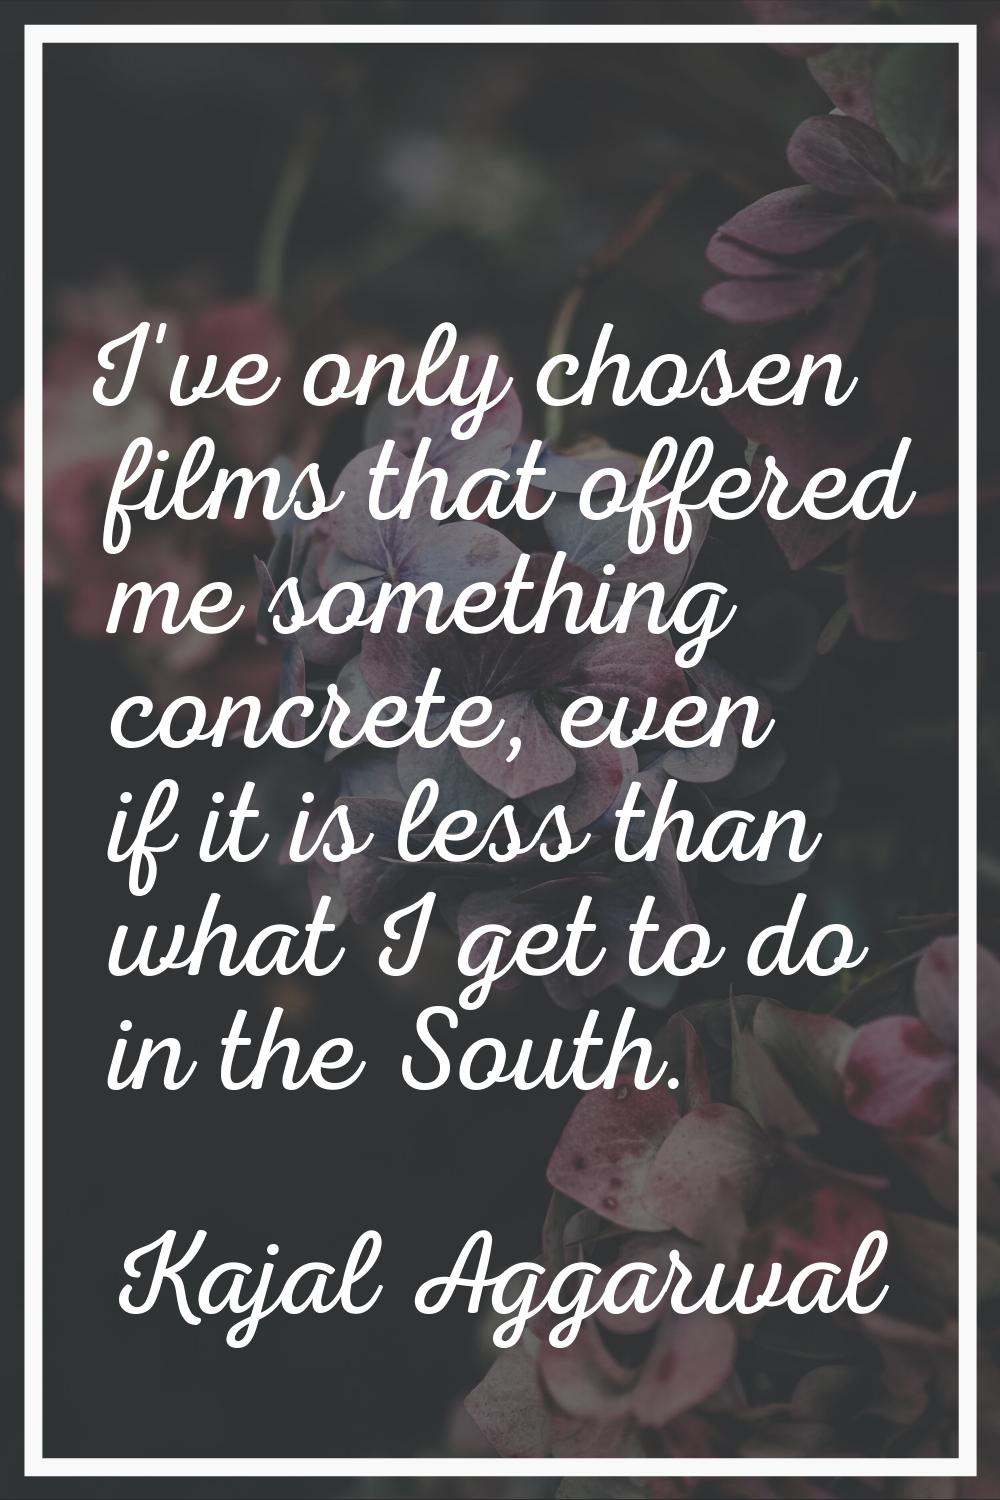 I've only chosen films that offered me something concrete, even if it is less than what I get to do